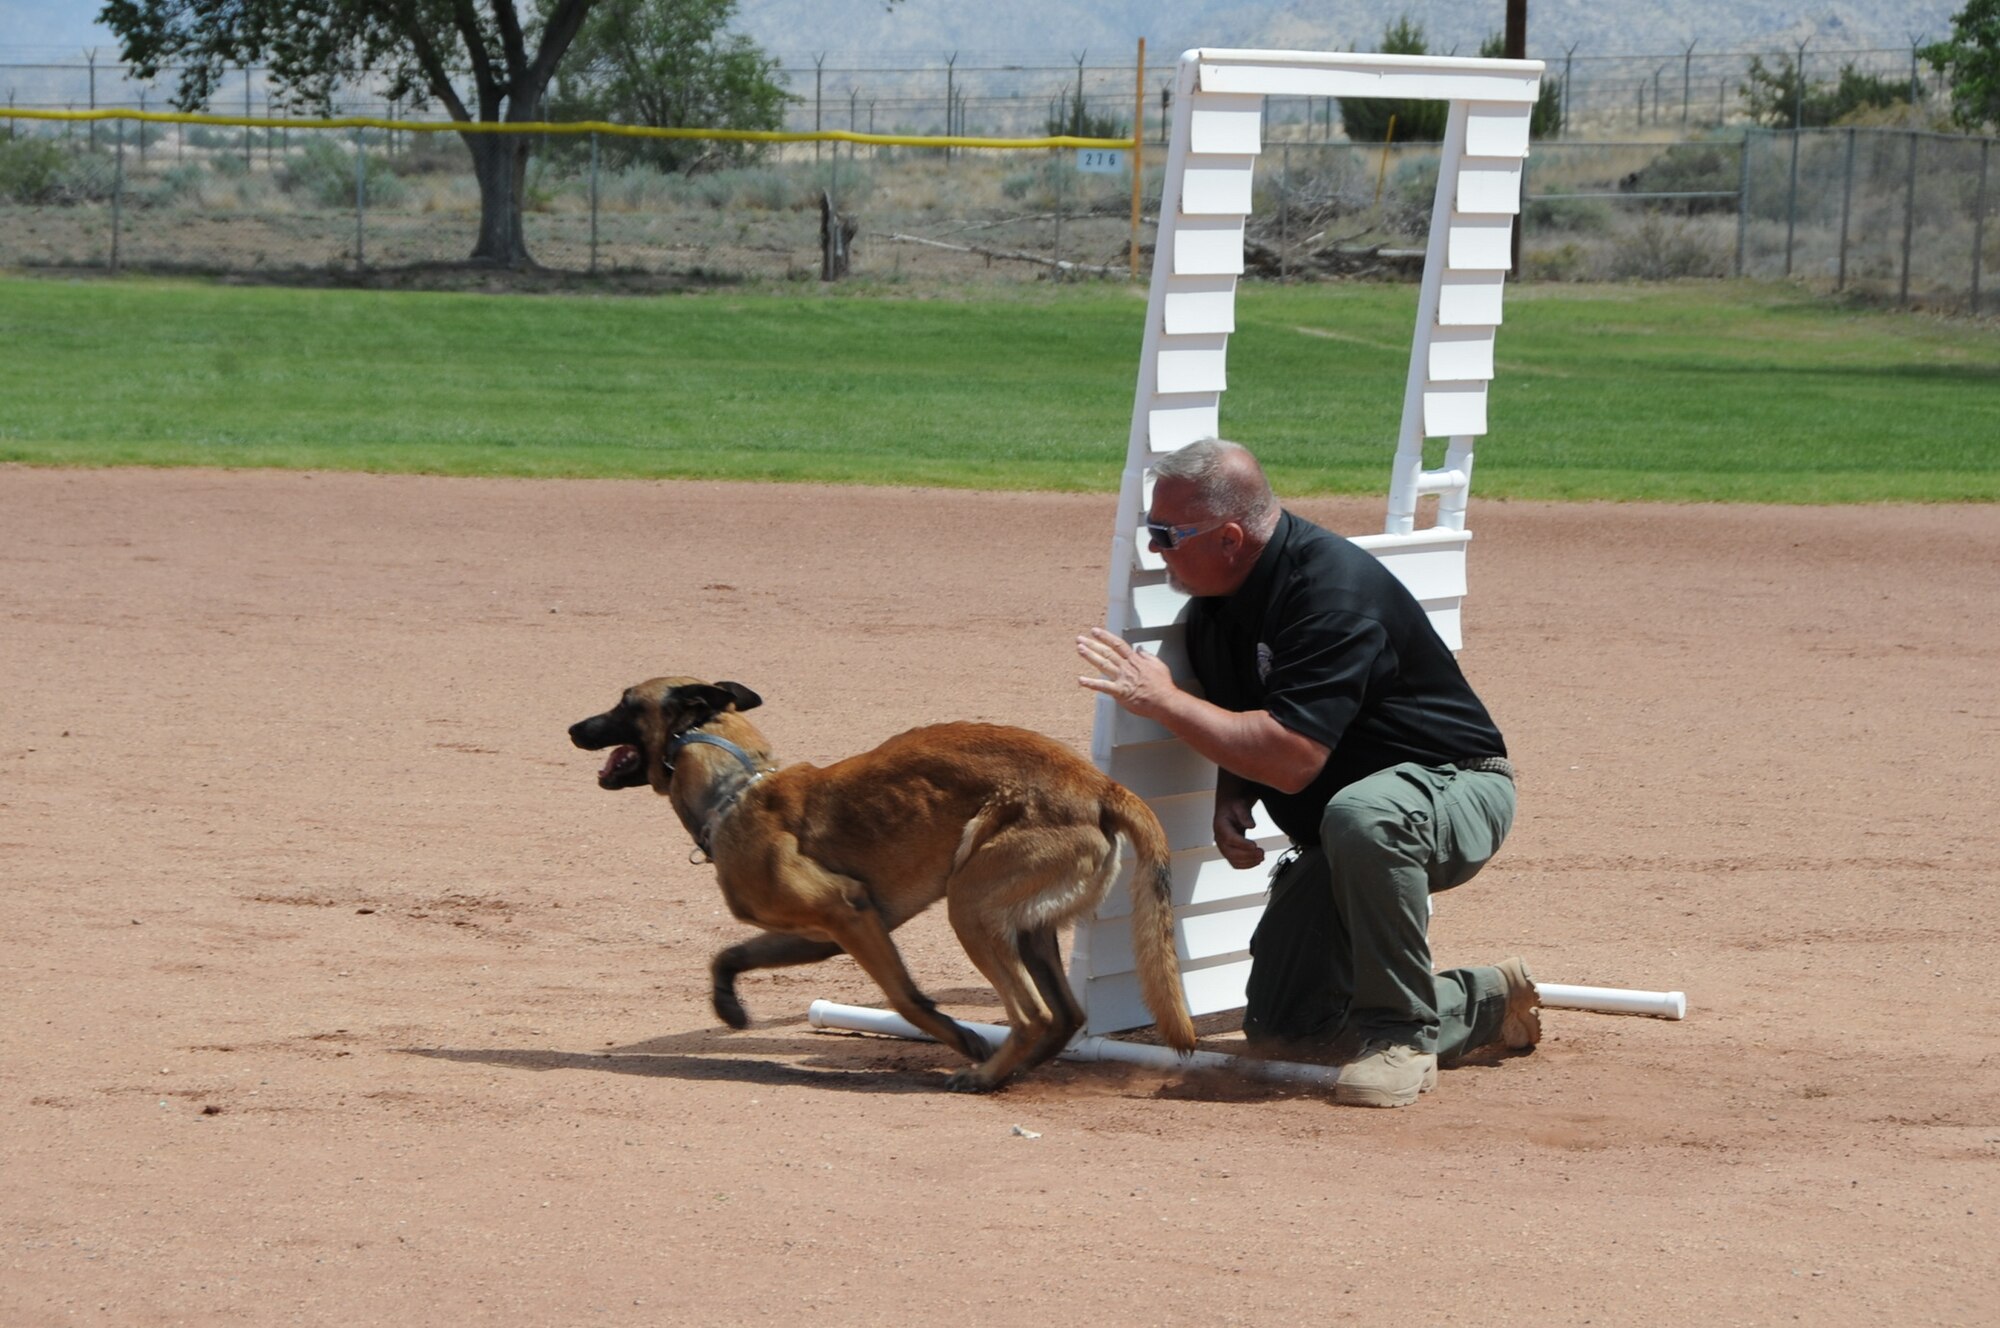 Ed Unis, a dog handler with the New Mexico Corrections Department, sends his canine partner Rudy after a decoy during the three-day Police Week working dog competition, May 16, 2016, Kirtland Air Force Base, New Mexico. (U.S. Air Force photo by Dennis Carlson)